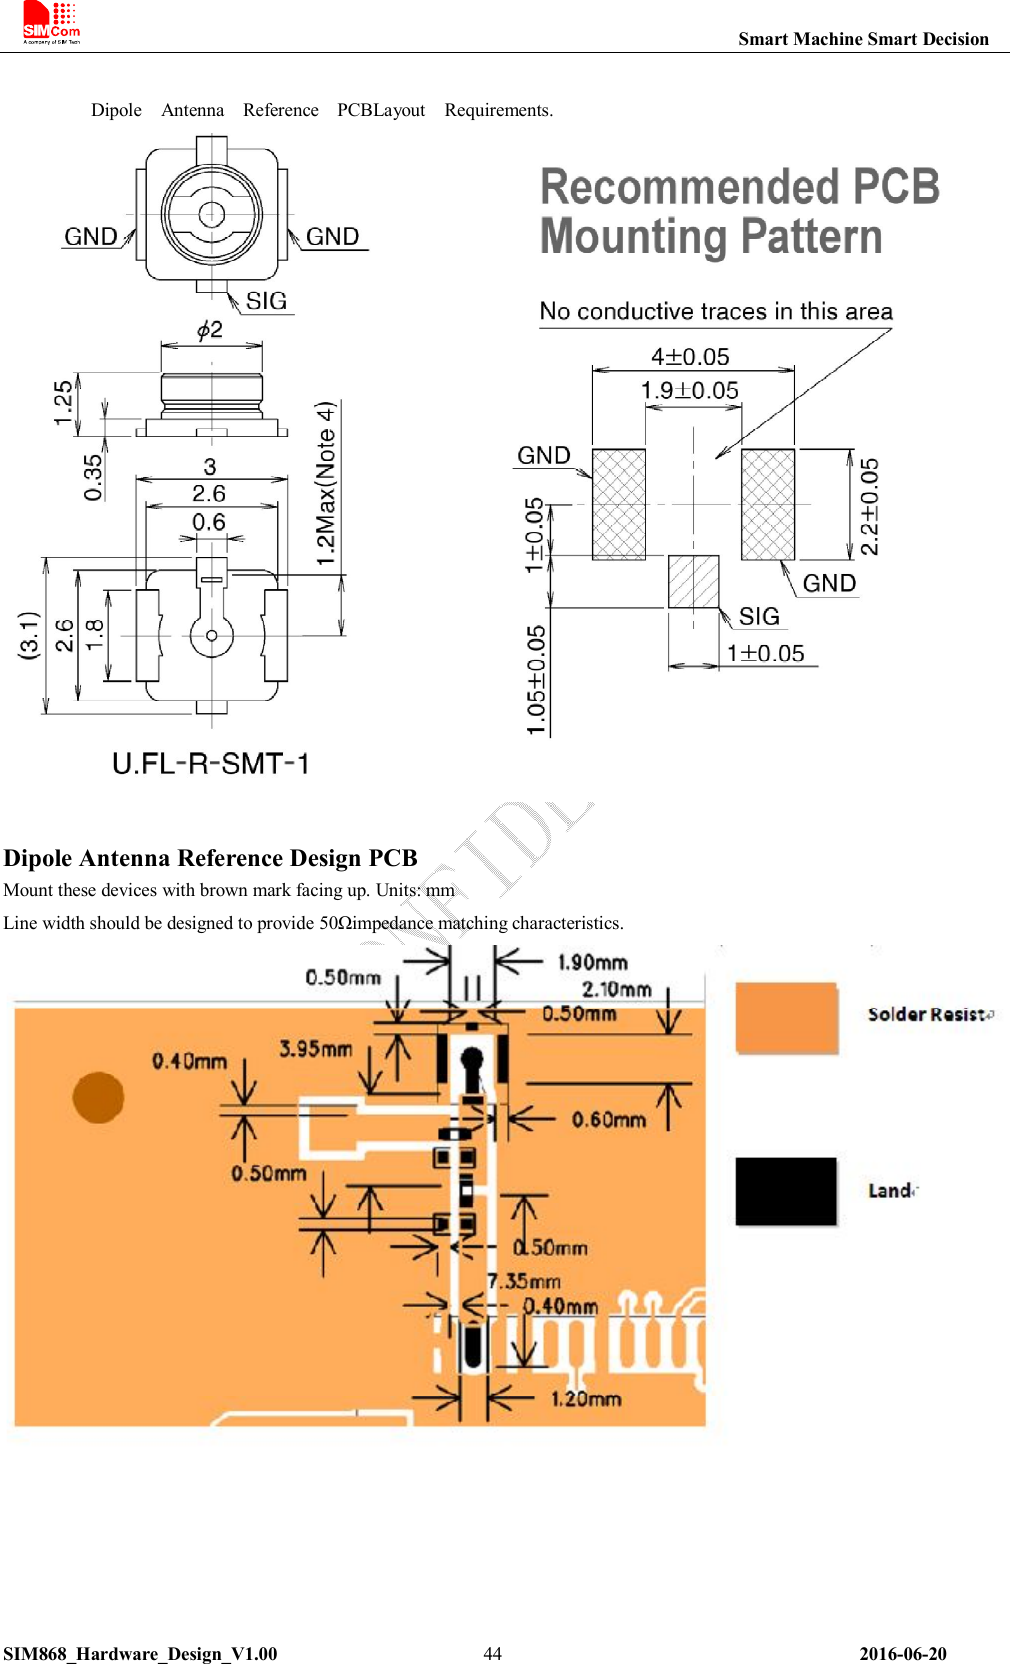                                                                       Smart Machine Smart Decision SIM868_Hardware_Design_V1.00                      44                                                                2016-06-20         Dipole    Antenna    Reference    PCBLayout    Requirements.   Dipole Antenna Reference Design PCB Mount these devices with brown mark facing up. Units: mm Line width should be designed to provide 50Ωimpedance matching characteristics.  